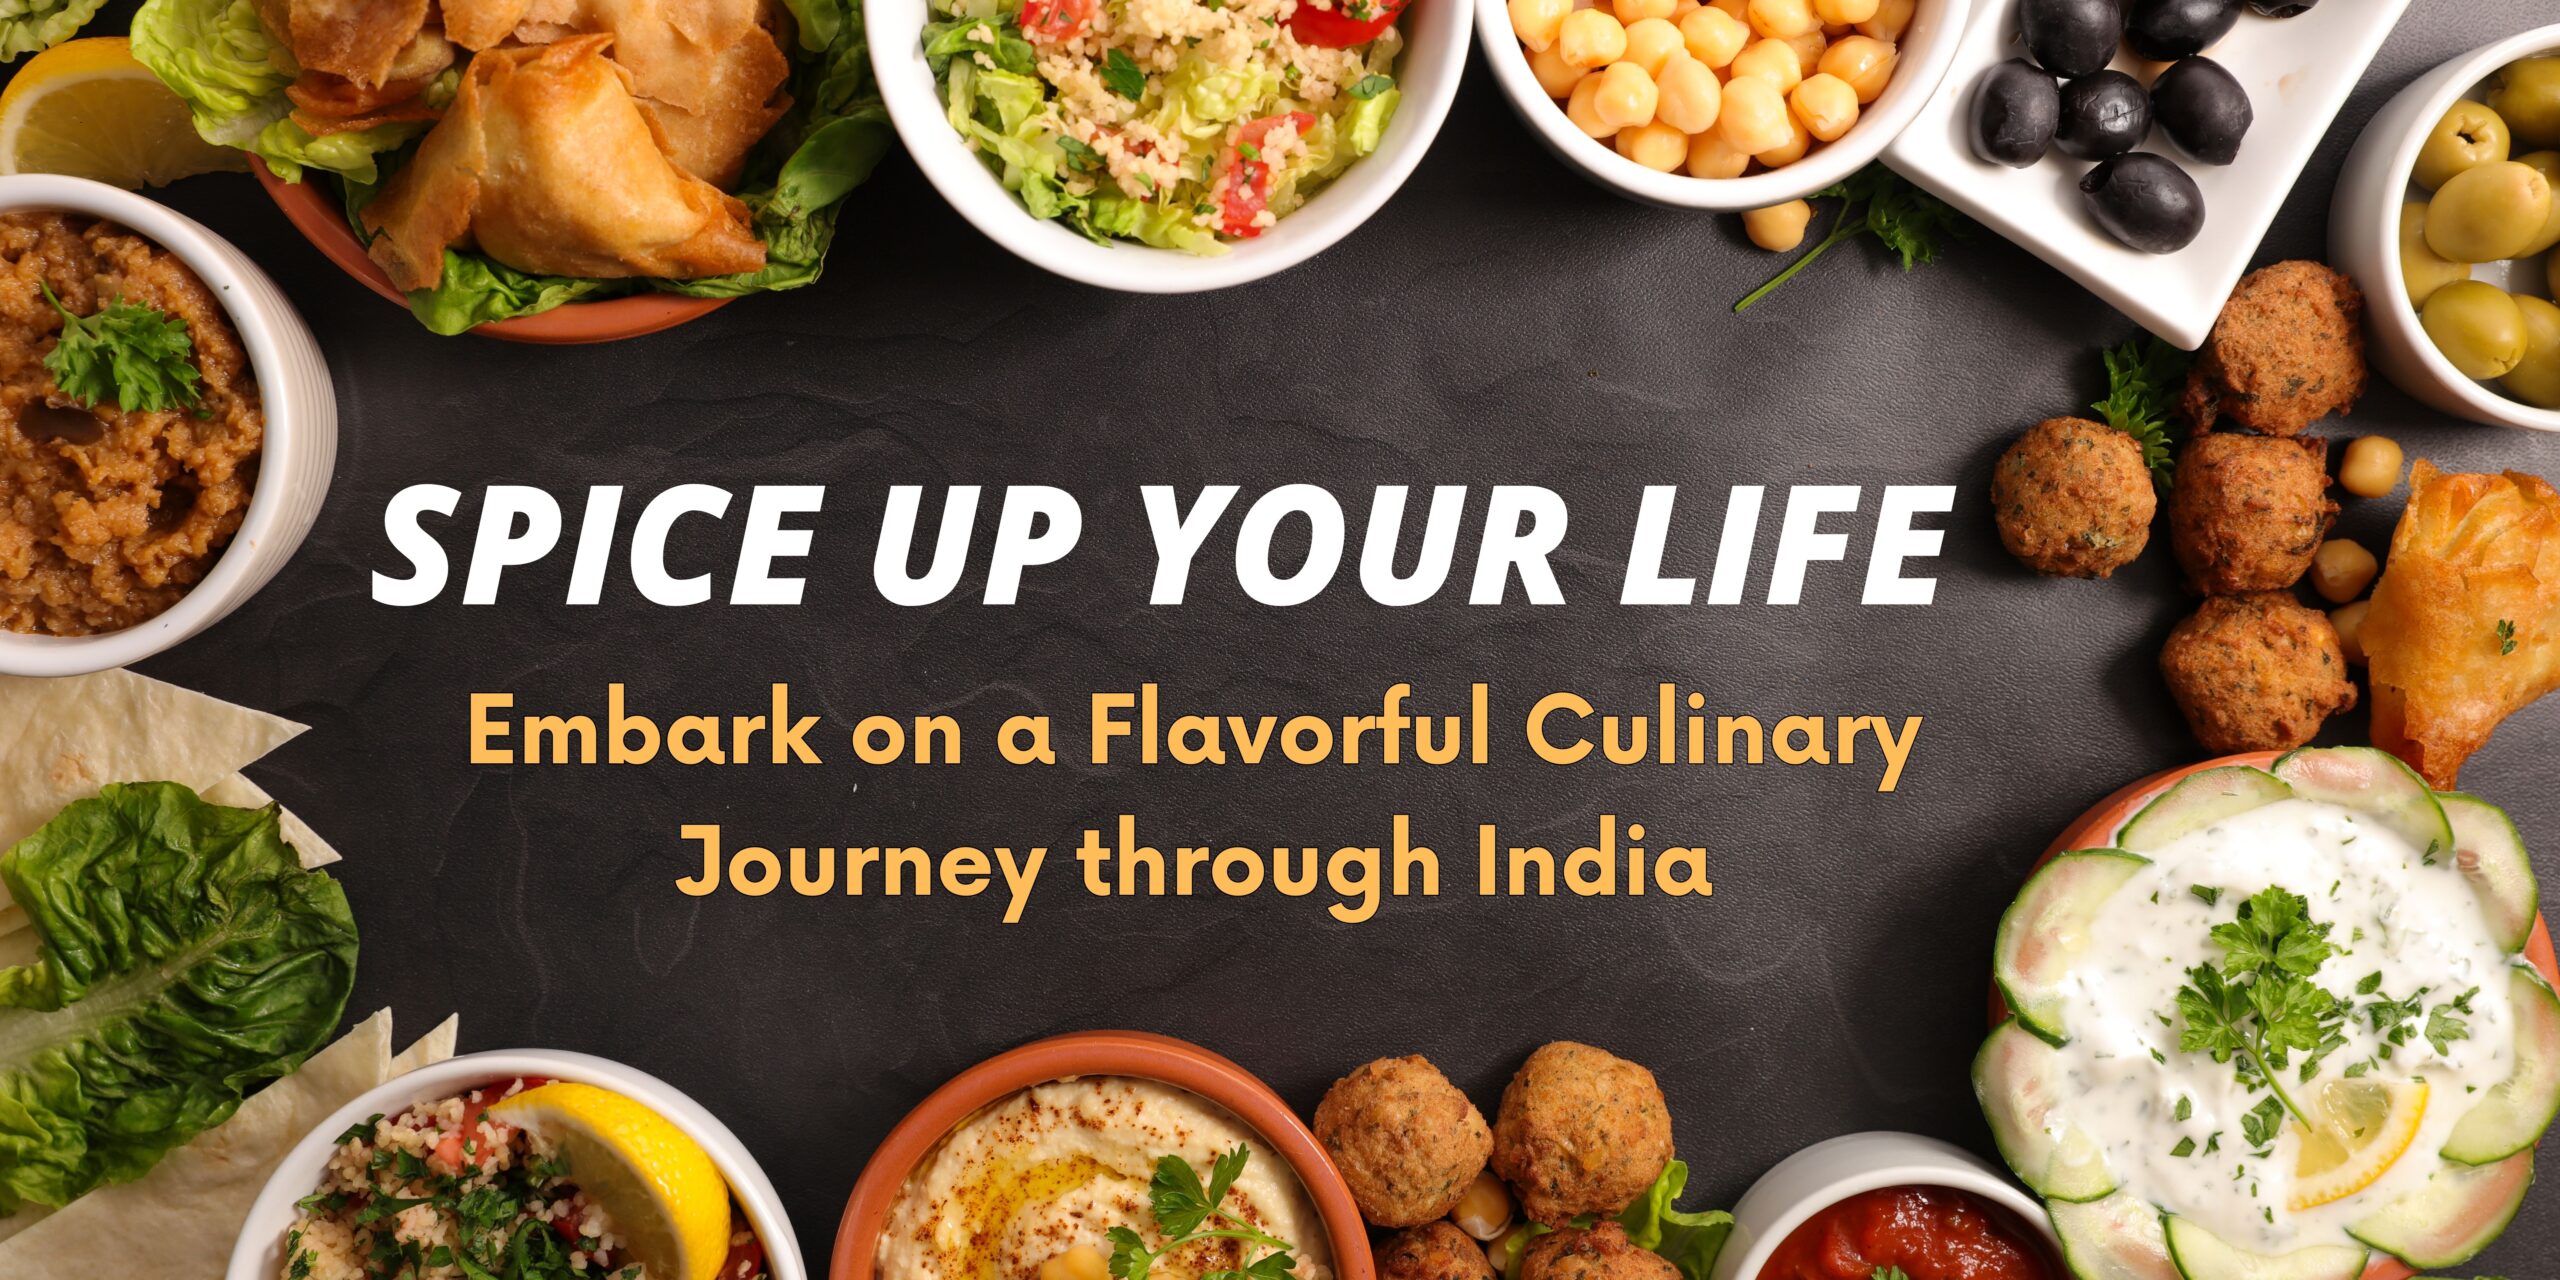 Embark on a Flavorful Culinary Journey through India